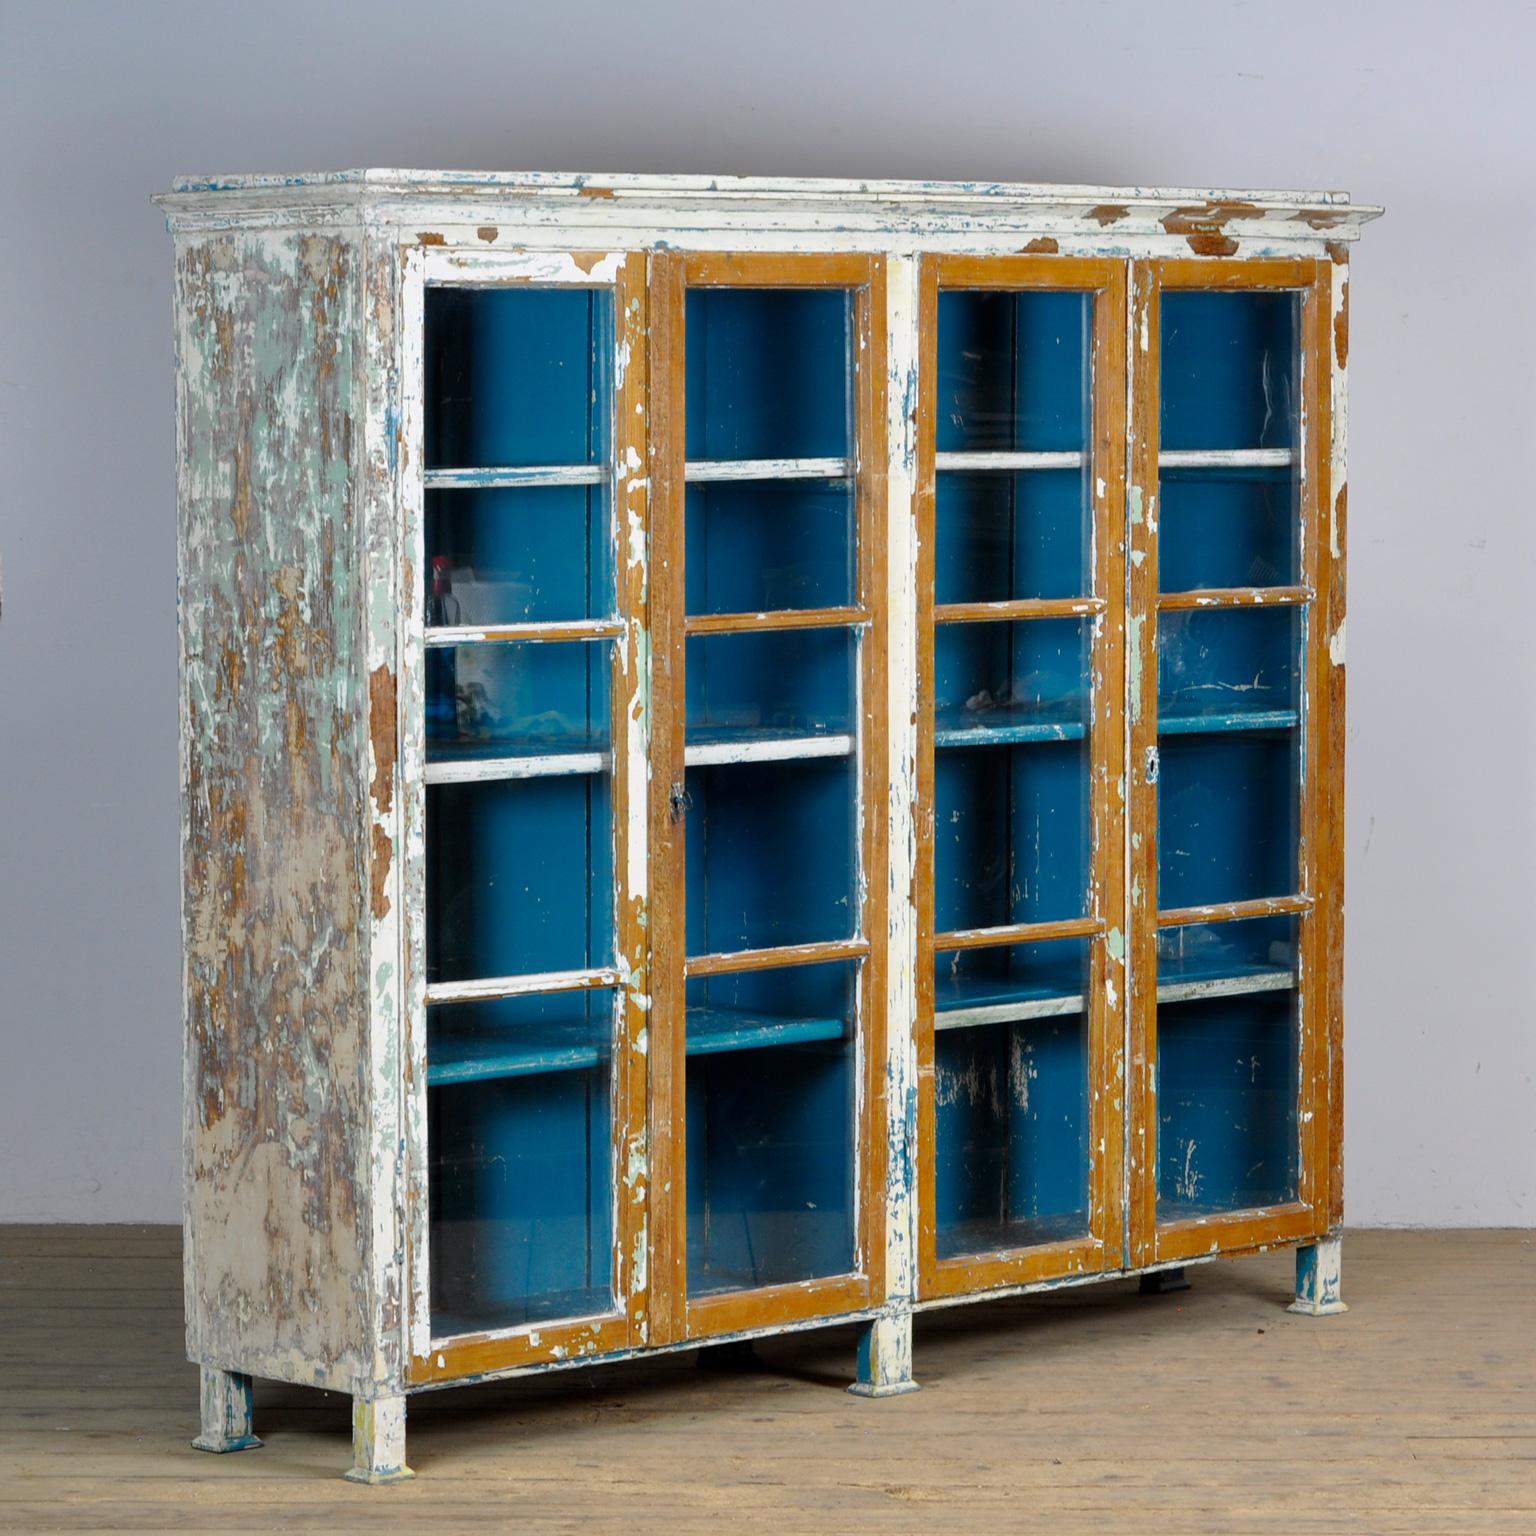 Large pine display cabinet, made around 1930. With four doors and 3 shelves behind them. The cabinet has had different colors over the years, which gives it a beautiful patina. With well-functioning locks.

